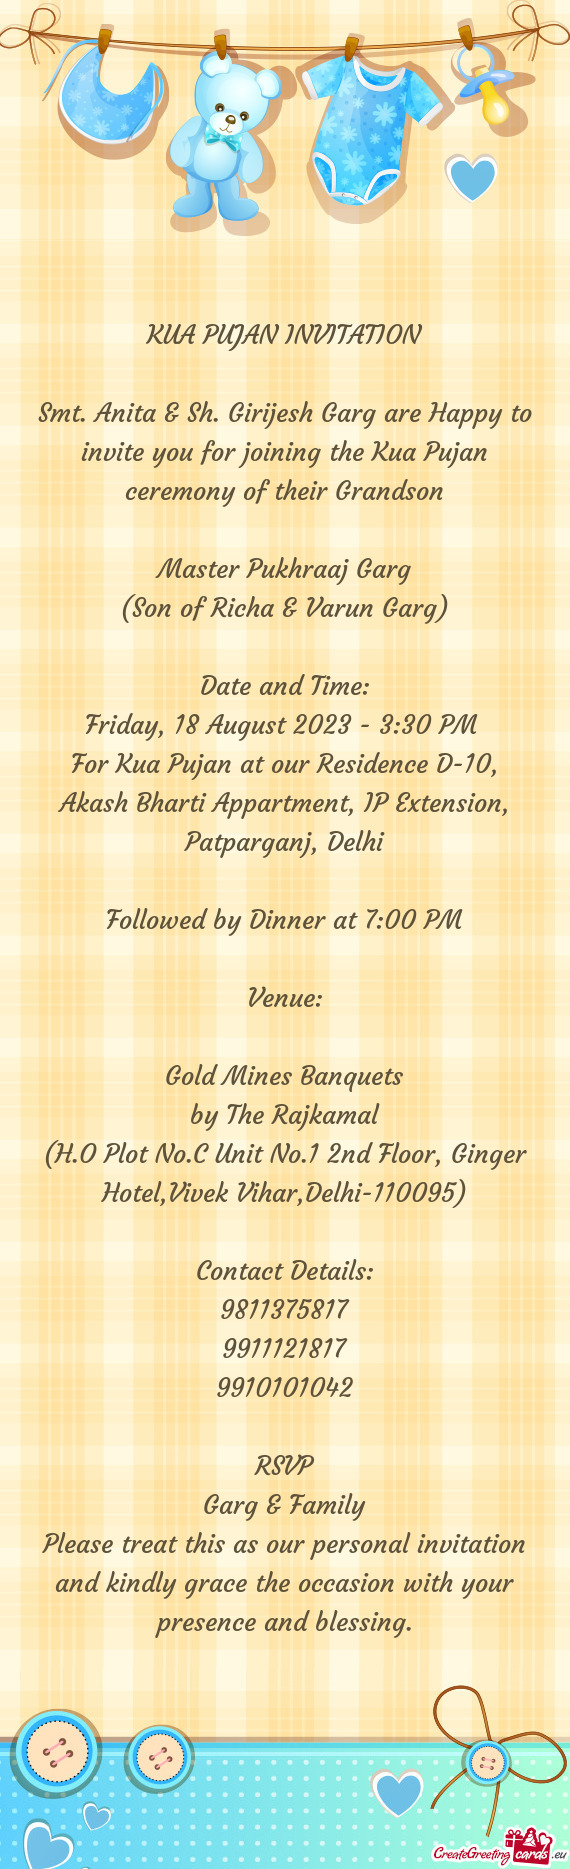 Smt. Anita & Sh. Girijesh Garg are Happy to invite you for joining the Kua Pujan ceremony of their G